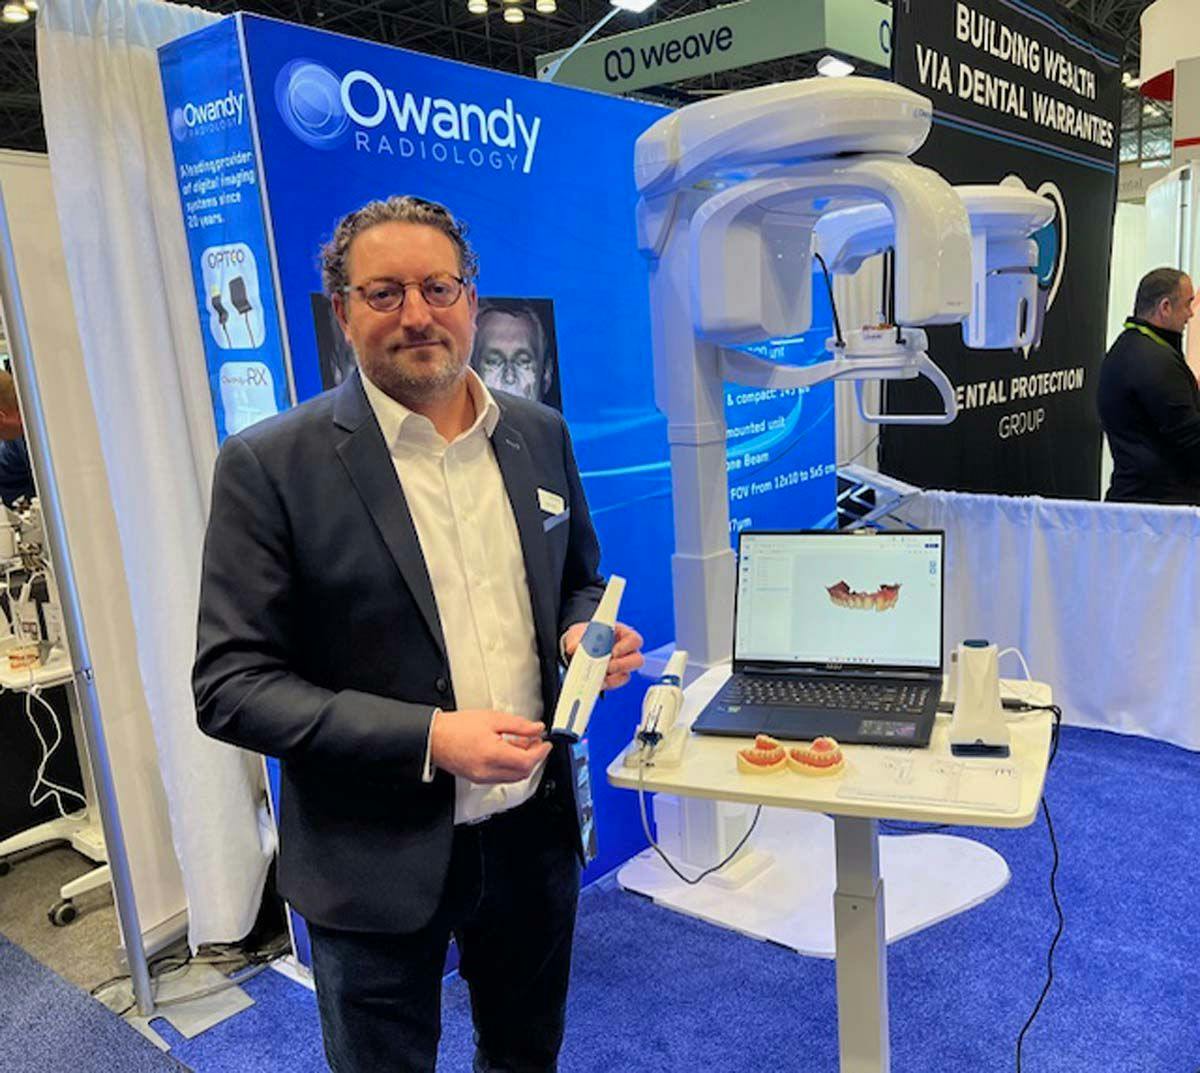 Owandy Radiology's VP of Sales and Marketing Boris Loyez shows off the new Owandy-IOS intraoral scanner Sunday at tjhe GNYDM. | Image Credit: © Stan Goff 